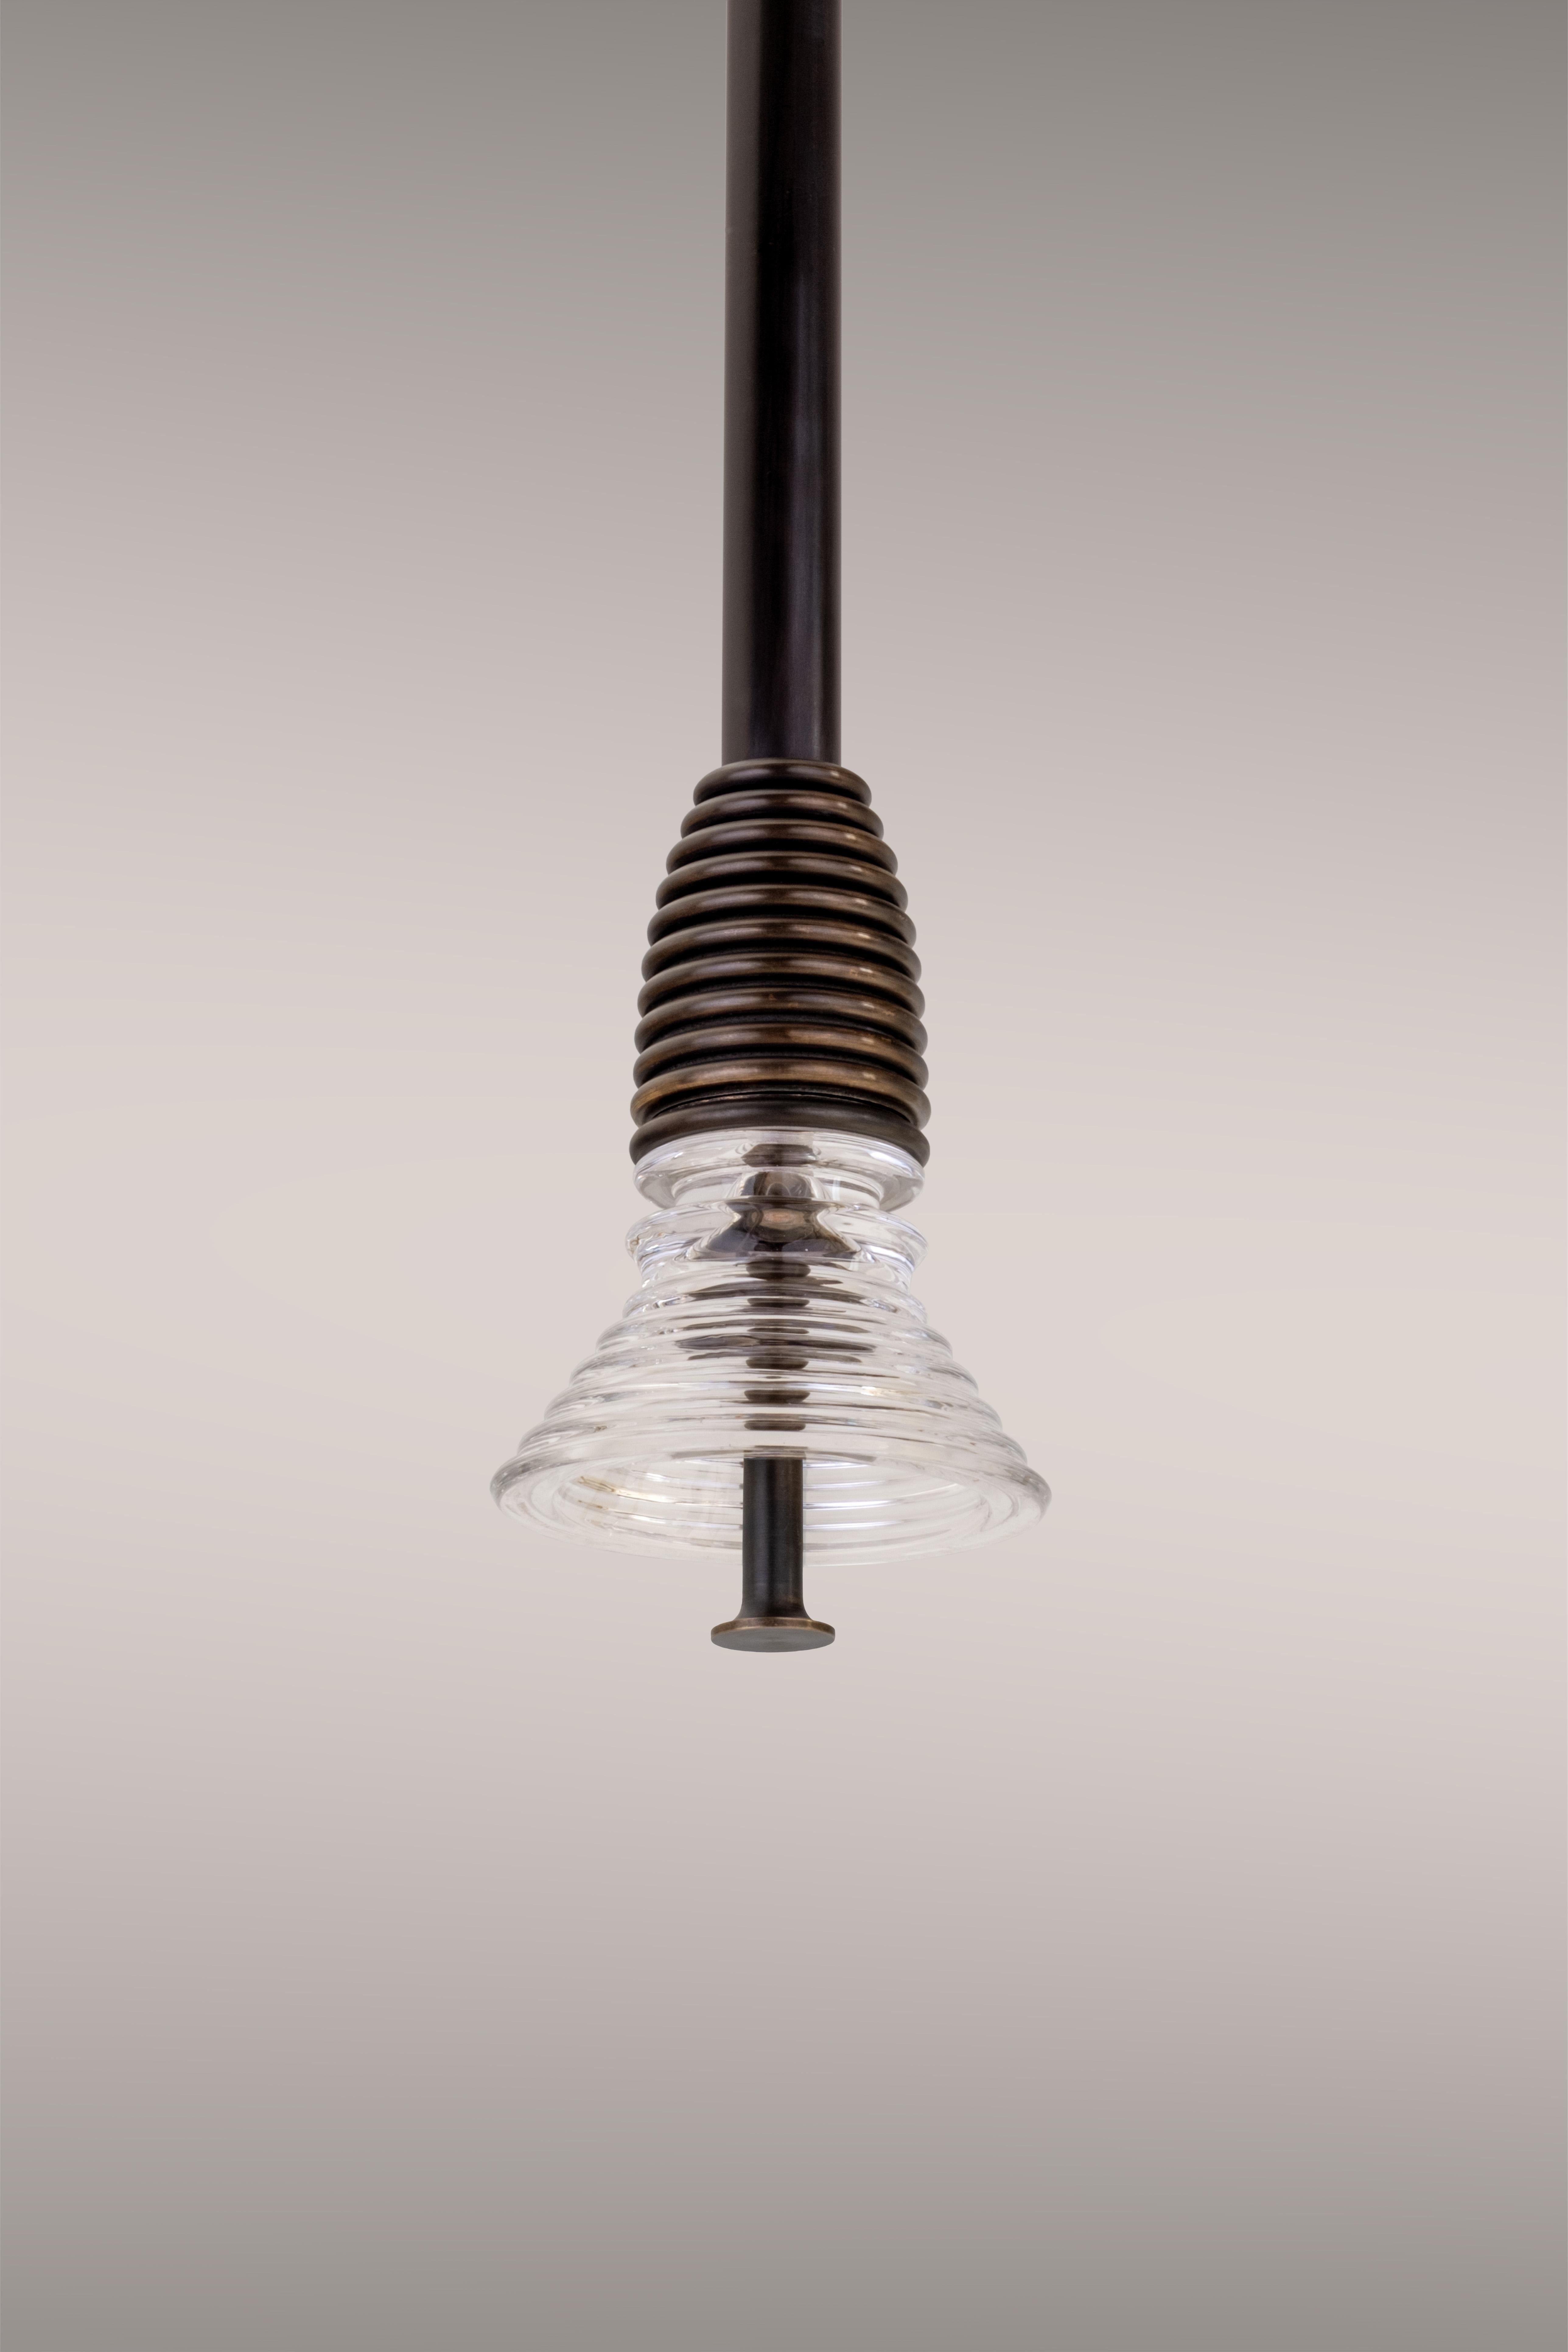 British The Insulator 'A' Pendant in dark brass and frosted glass by NOVOCASTRIAN deco For Sale